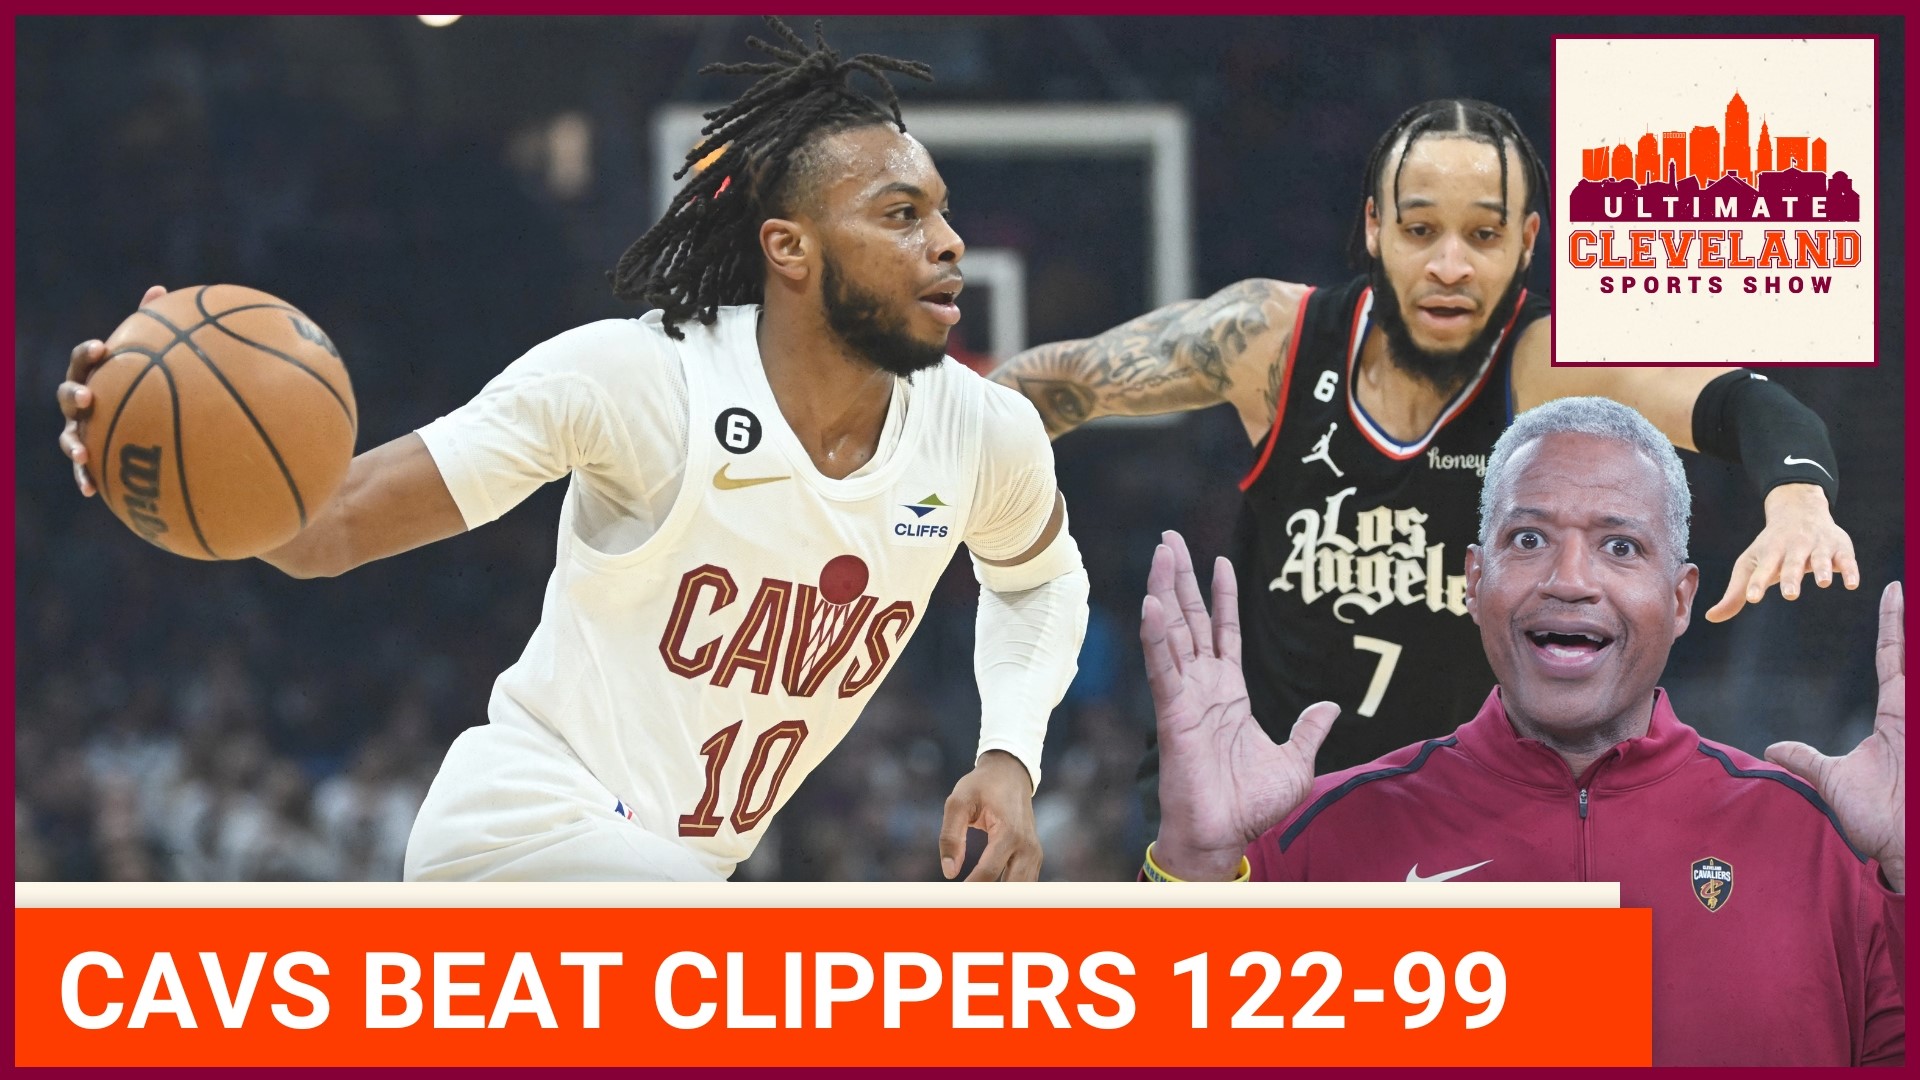 Cavs get much needed home win over the Clippers after disappointing road trip.